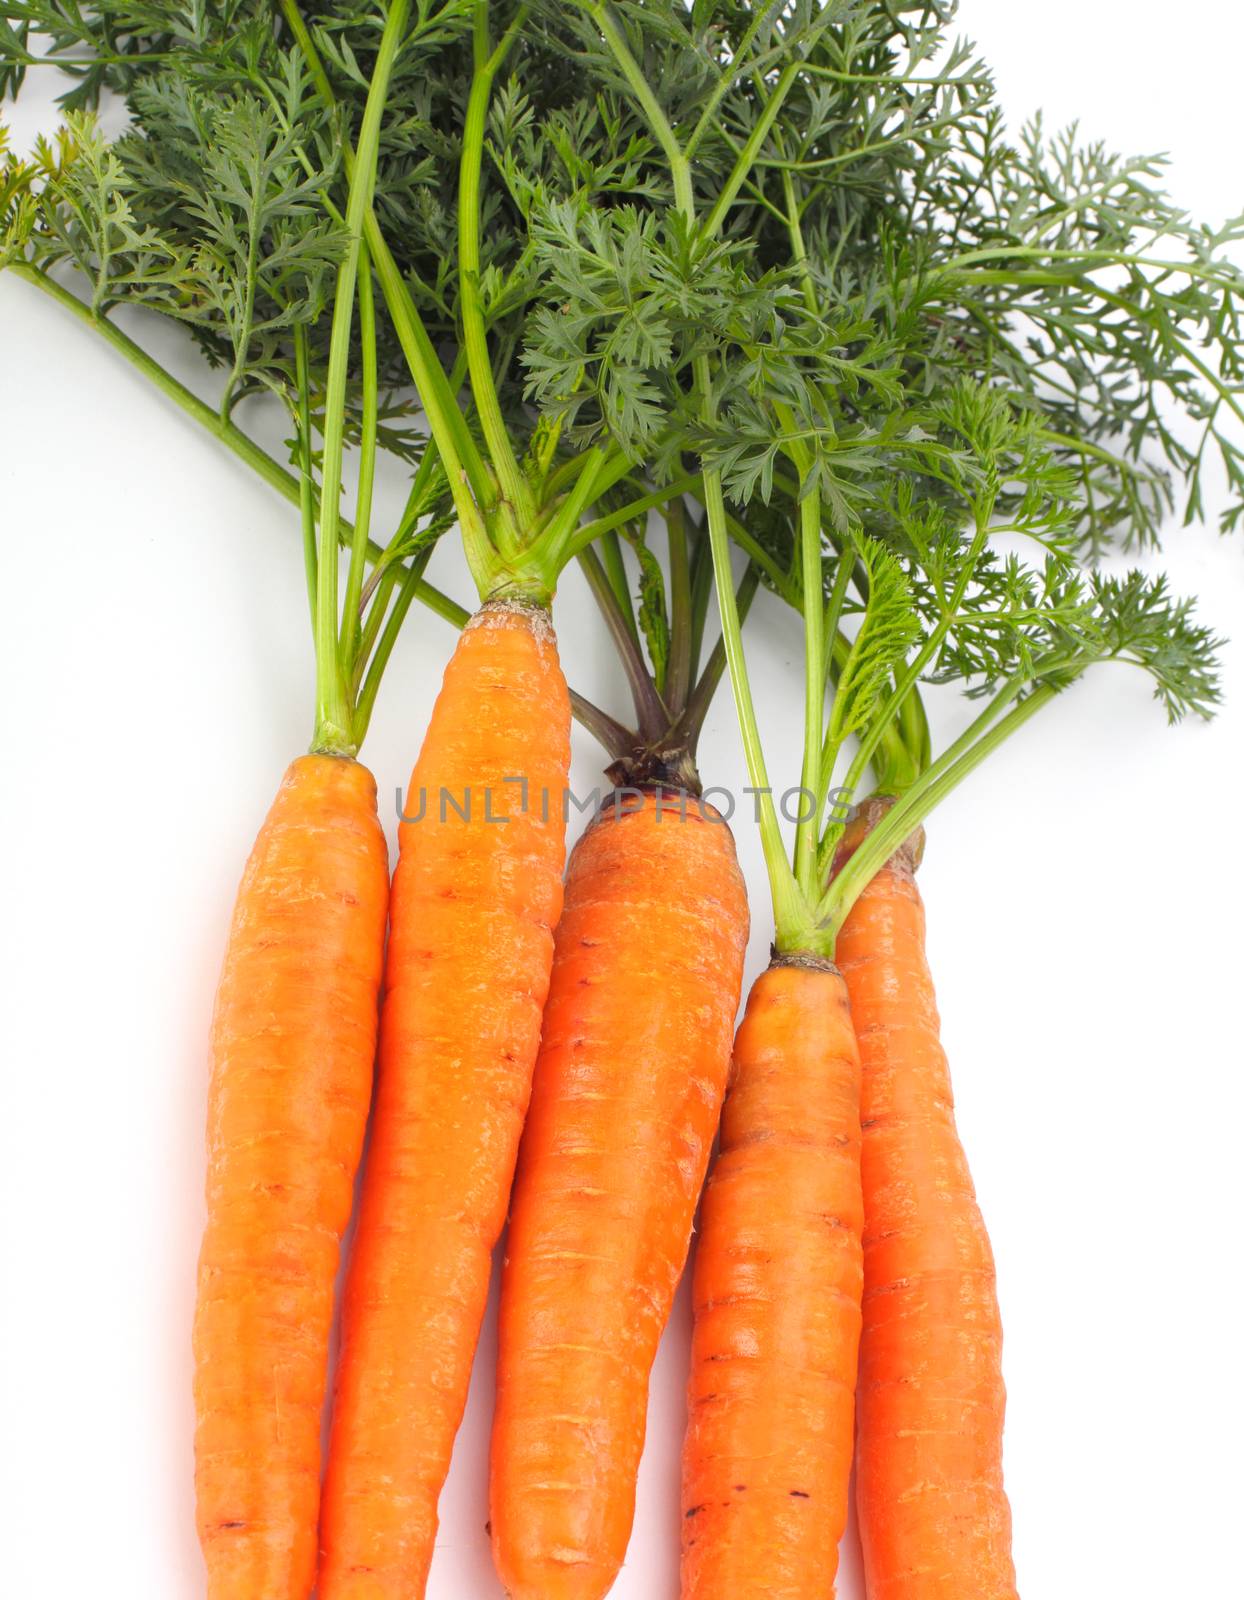 carrots with green leaves on white by rudchenko